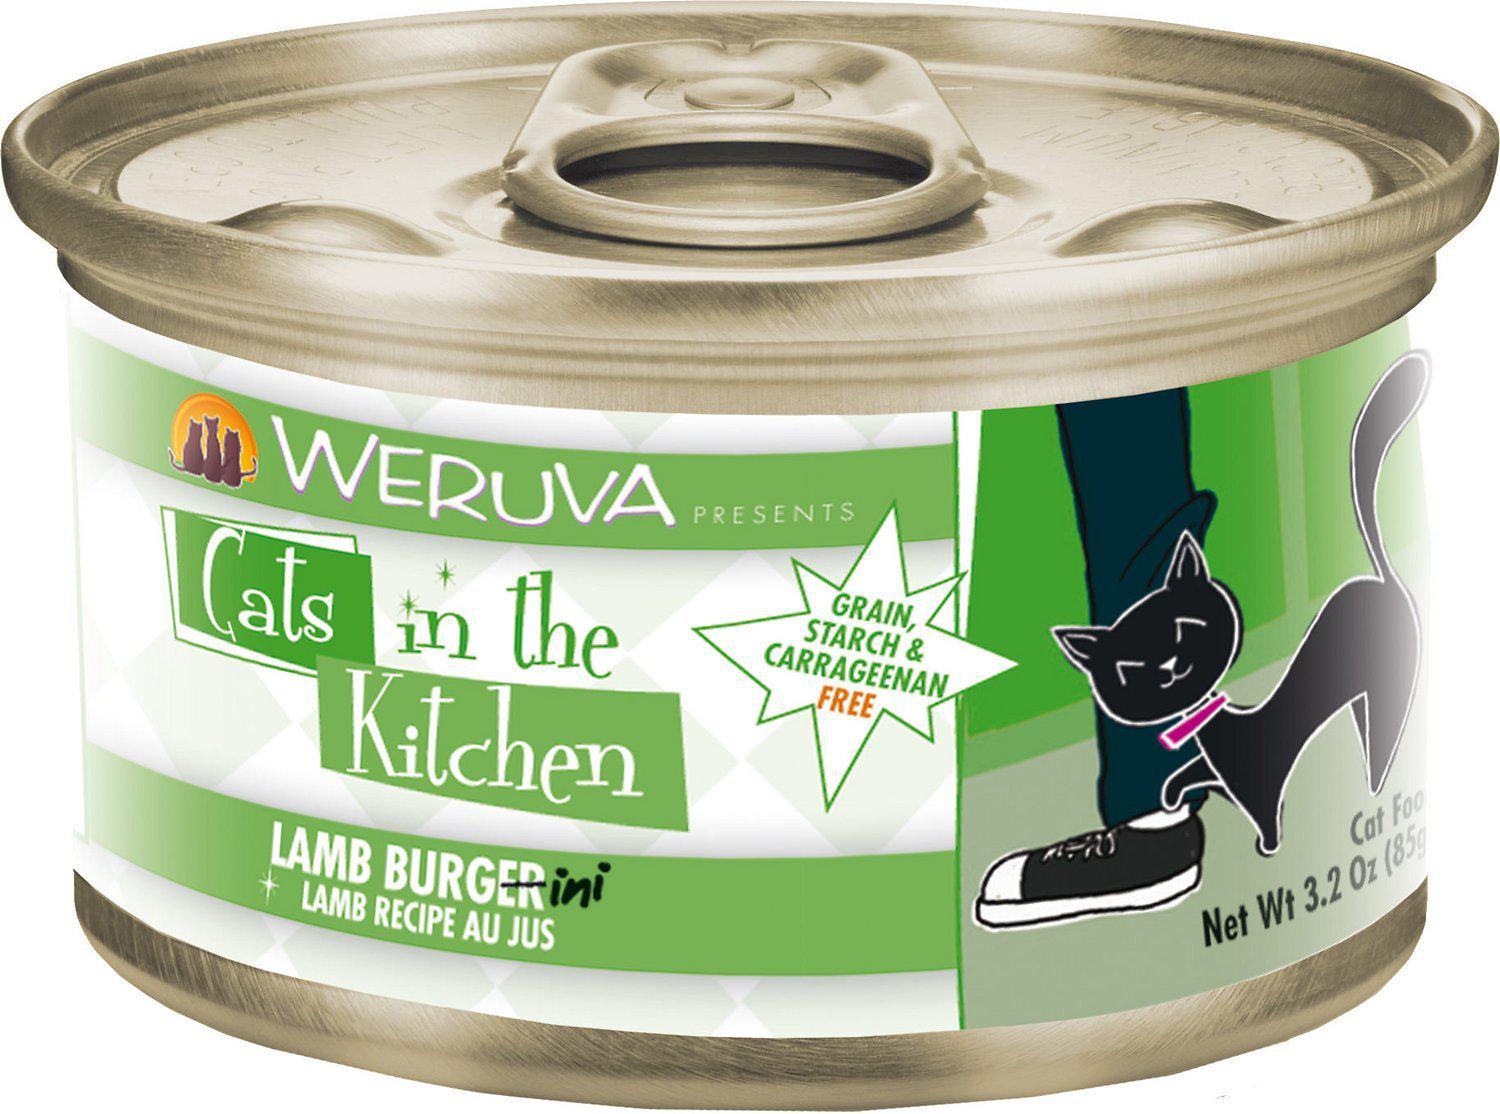 Weruva Cats In the Kitchen Lamb Burgini Grain-Free Wet Cat Food-Le Pup Pet Supplies and Grooming